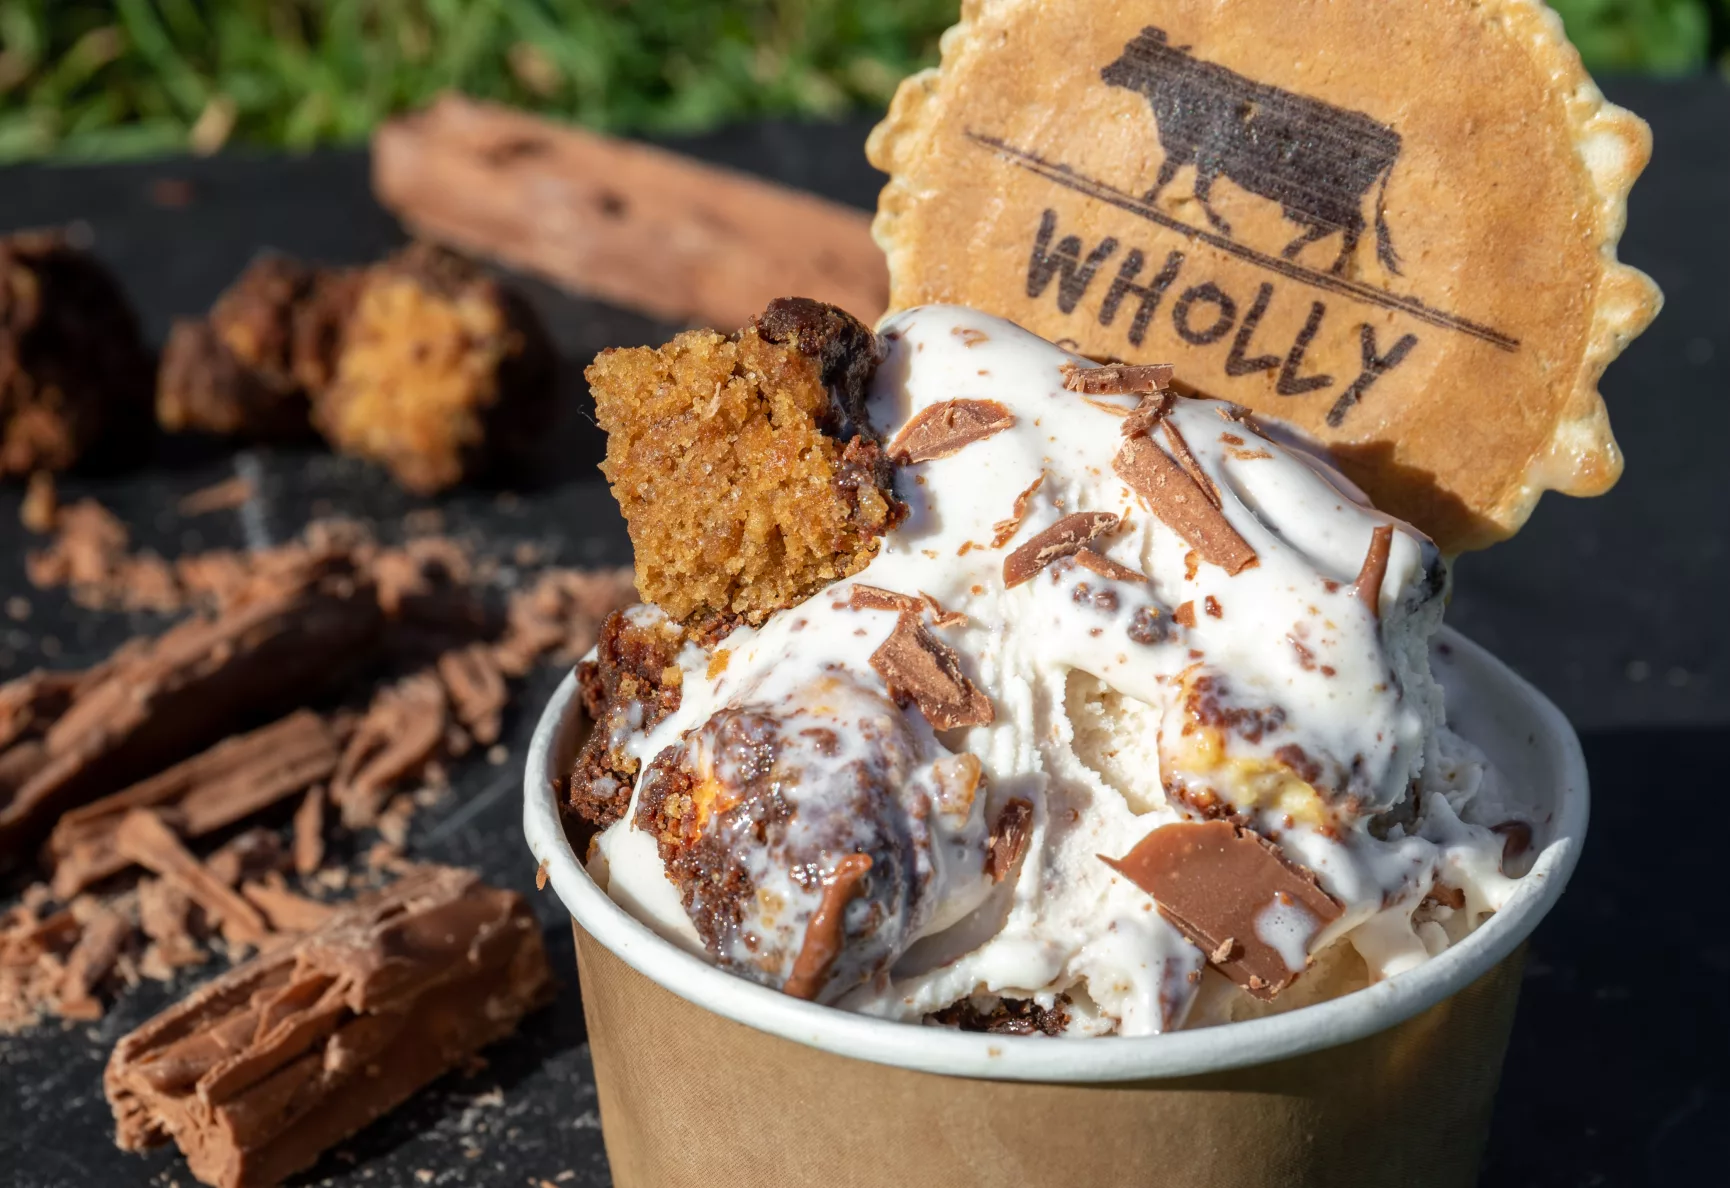 Chocolate brownie topped ice cream with a Wholly branded wafer